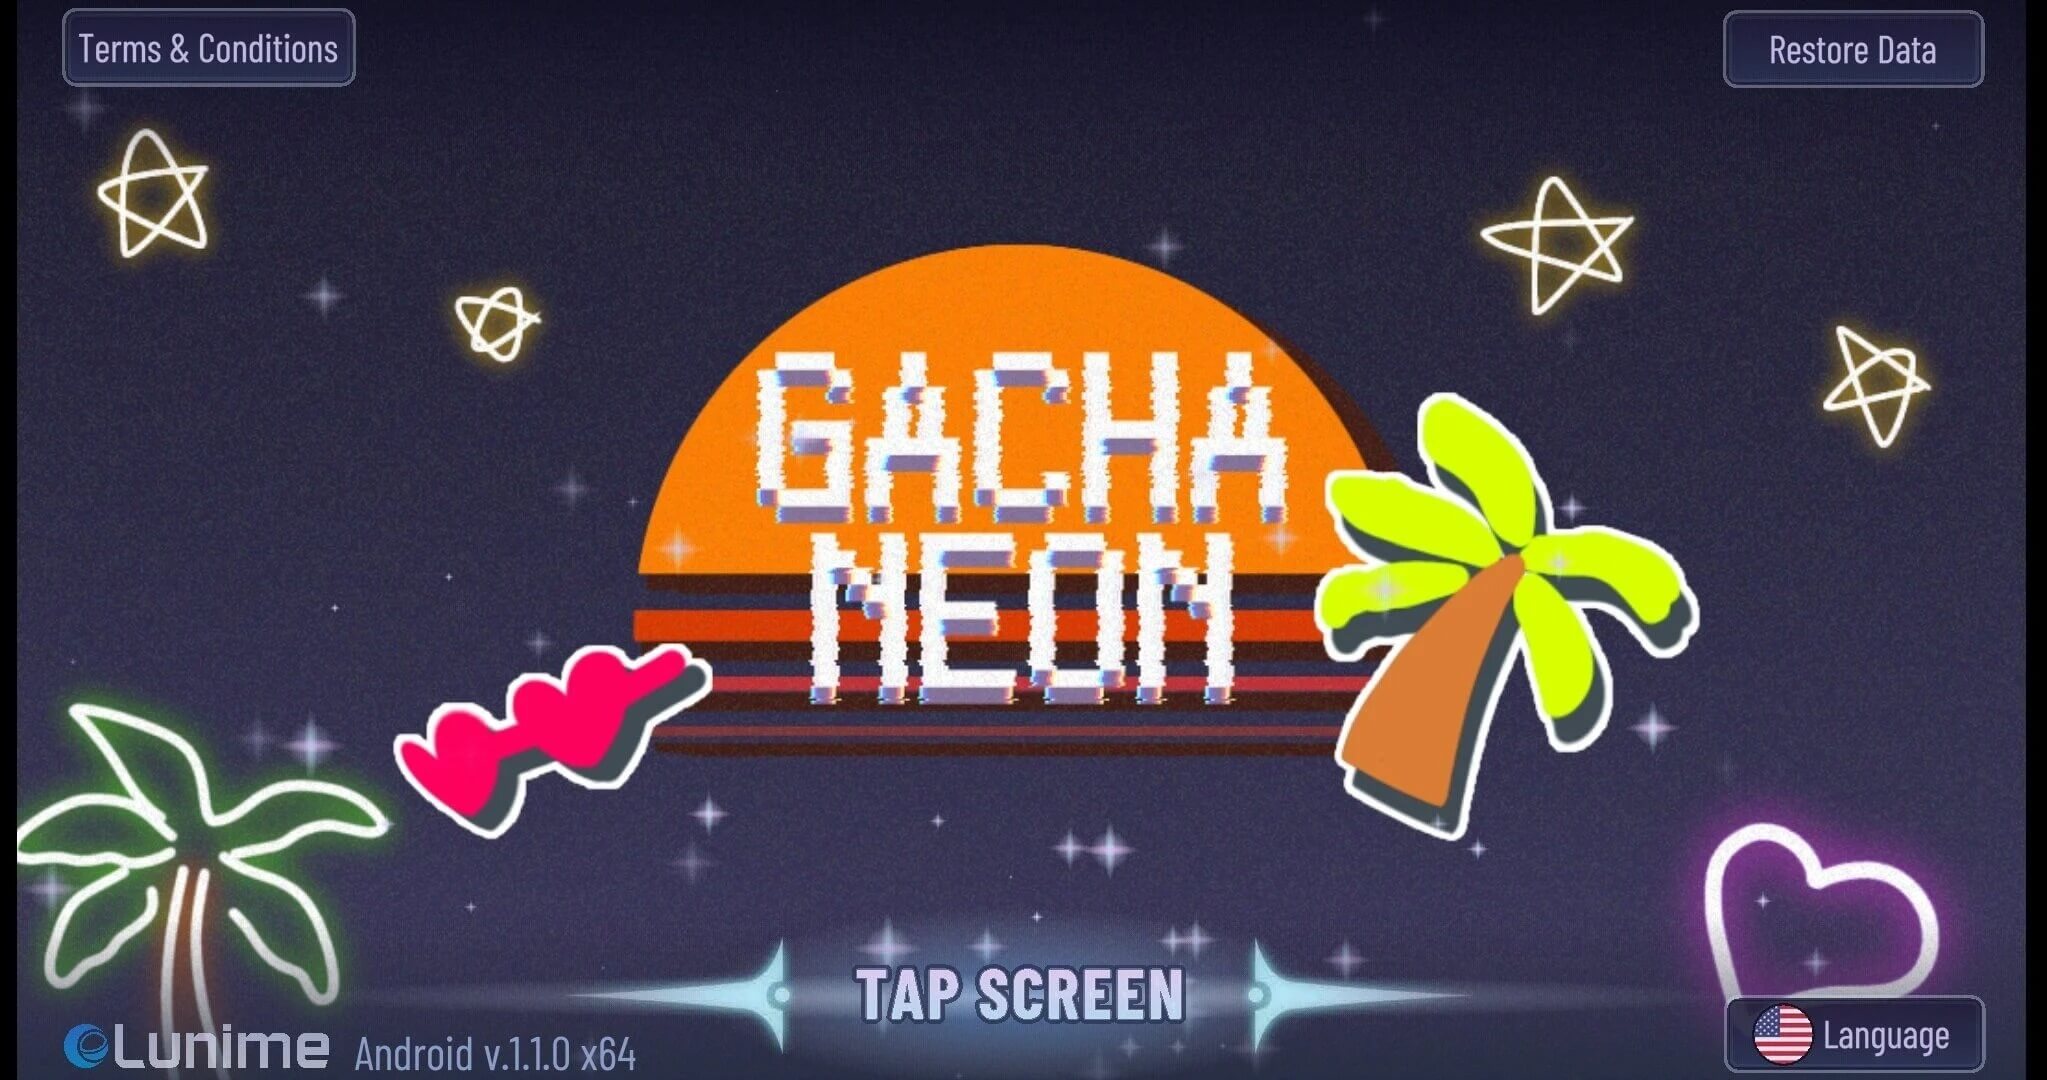 GACHA NEON Mod APK v110 Unlimited Money Coupons Download